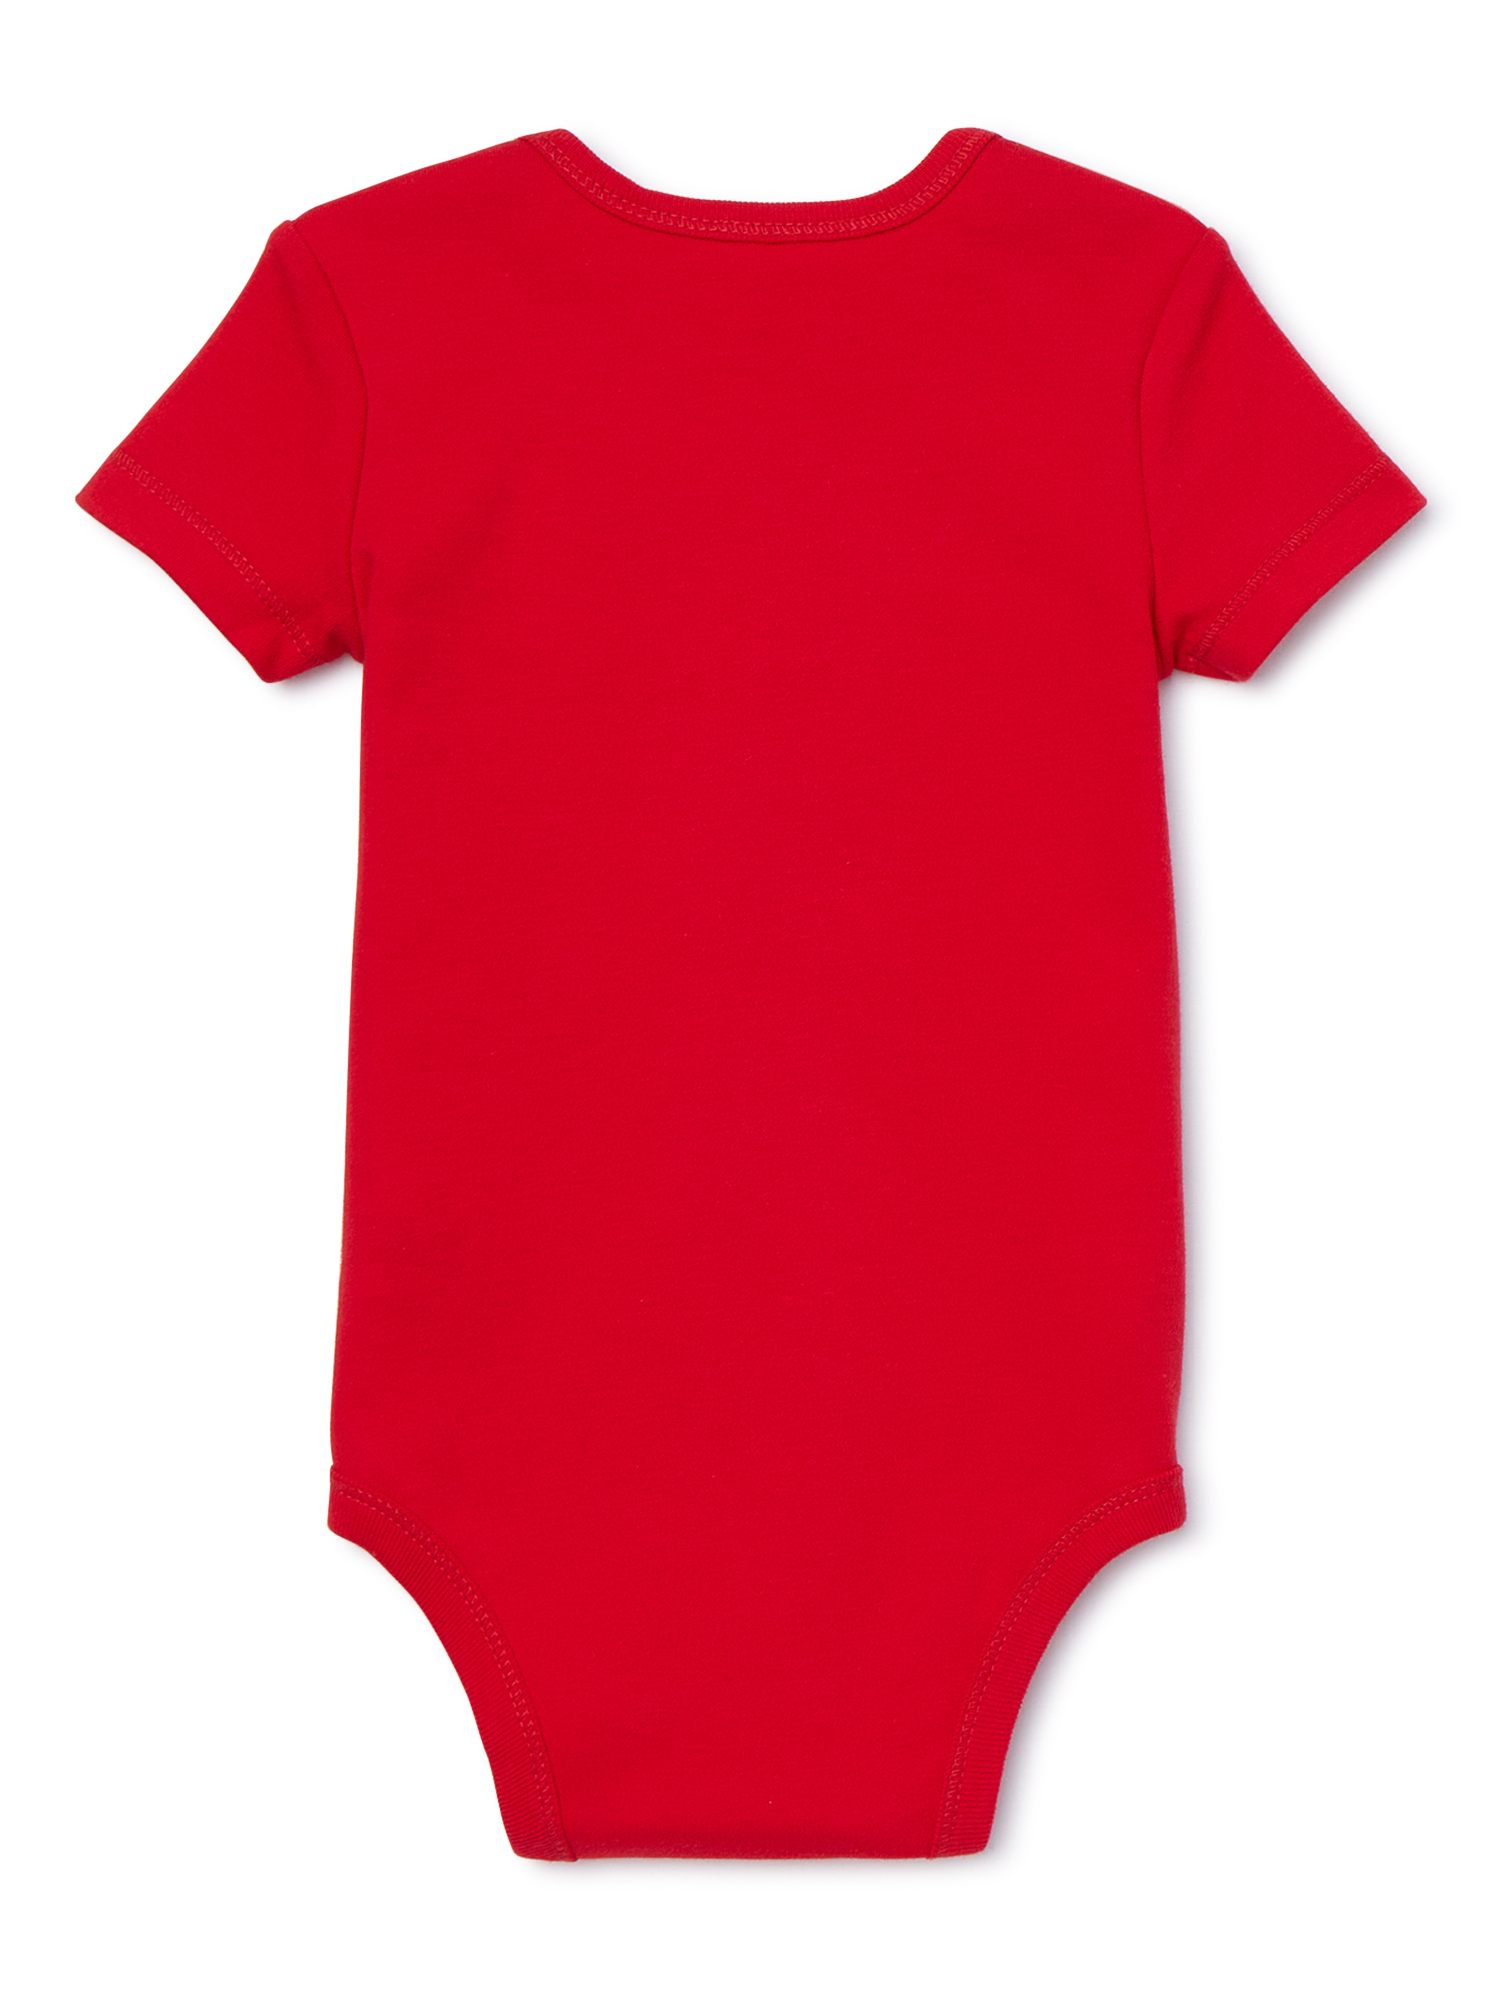 Justice League Baby Boy Short Sleeve Bodysuits, 3-Pack - image 5 of 7